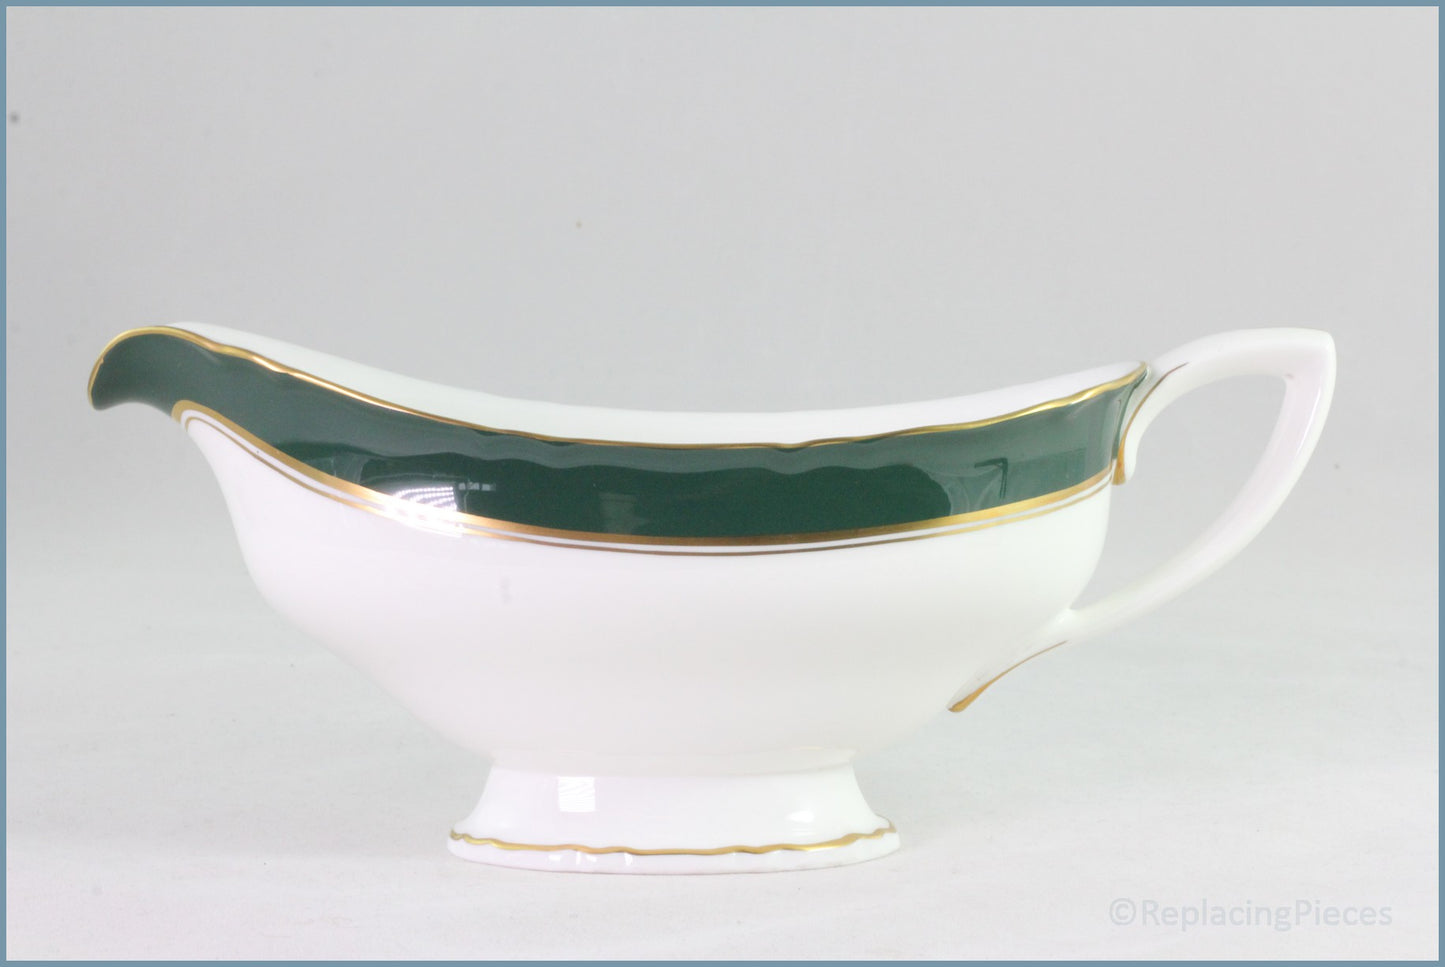 Royal Worcester - Cavendish (Leather Green) - Gravy Boat